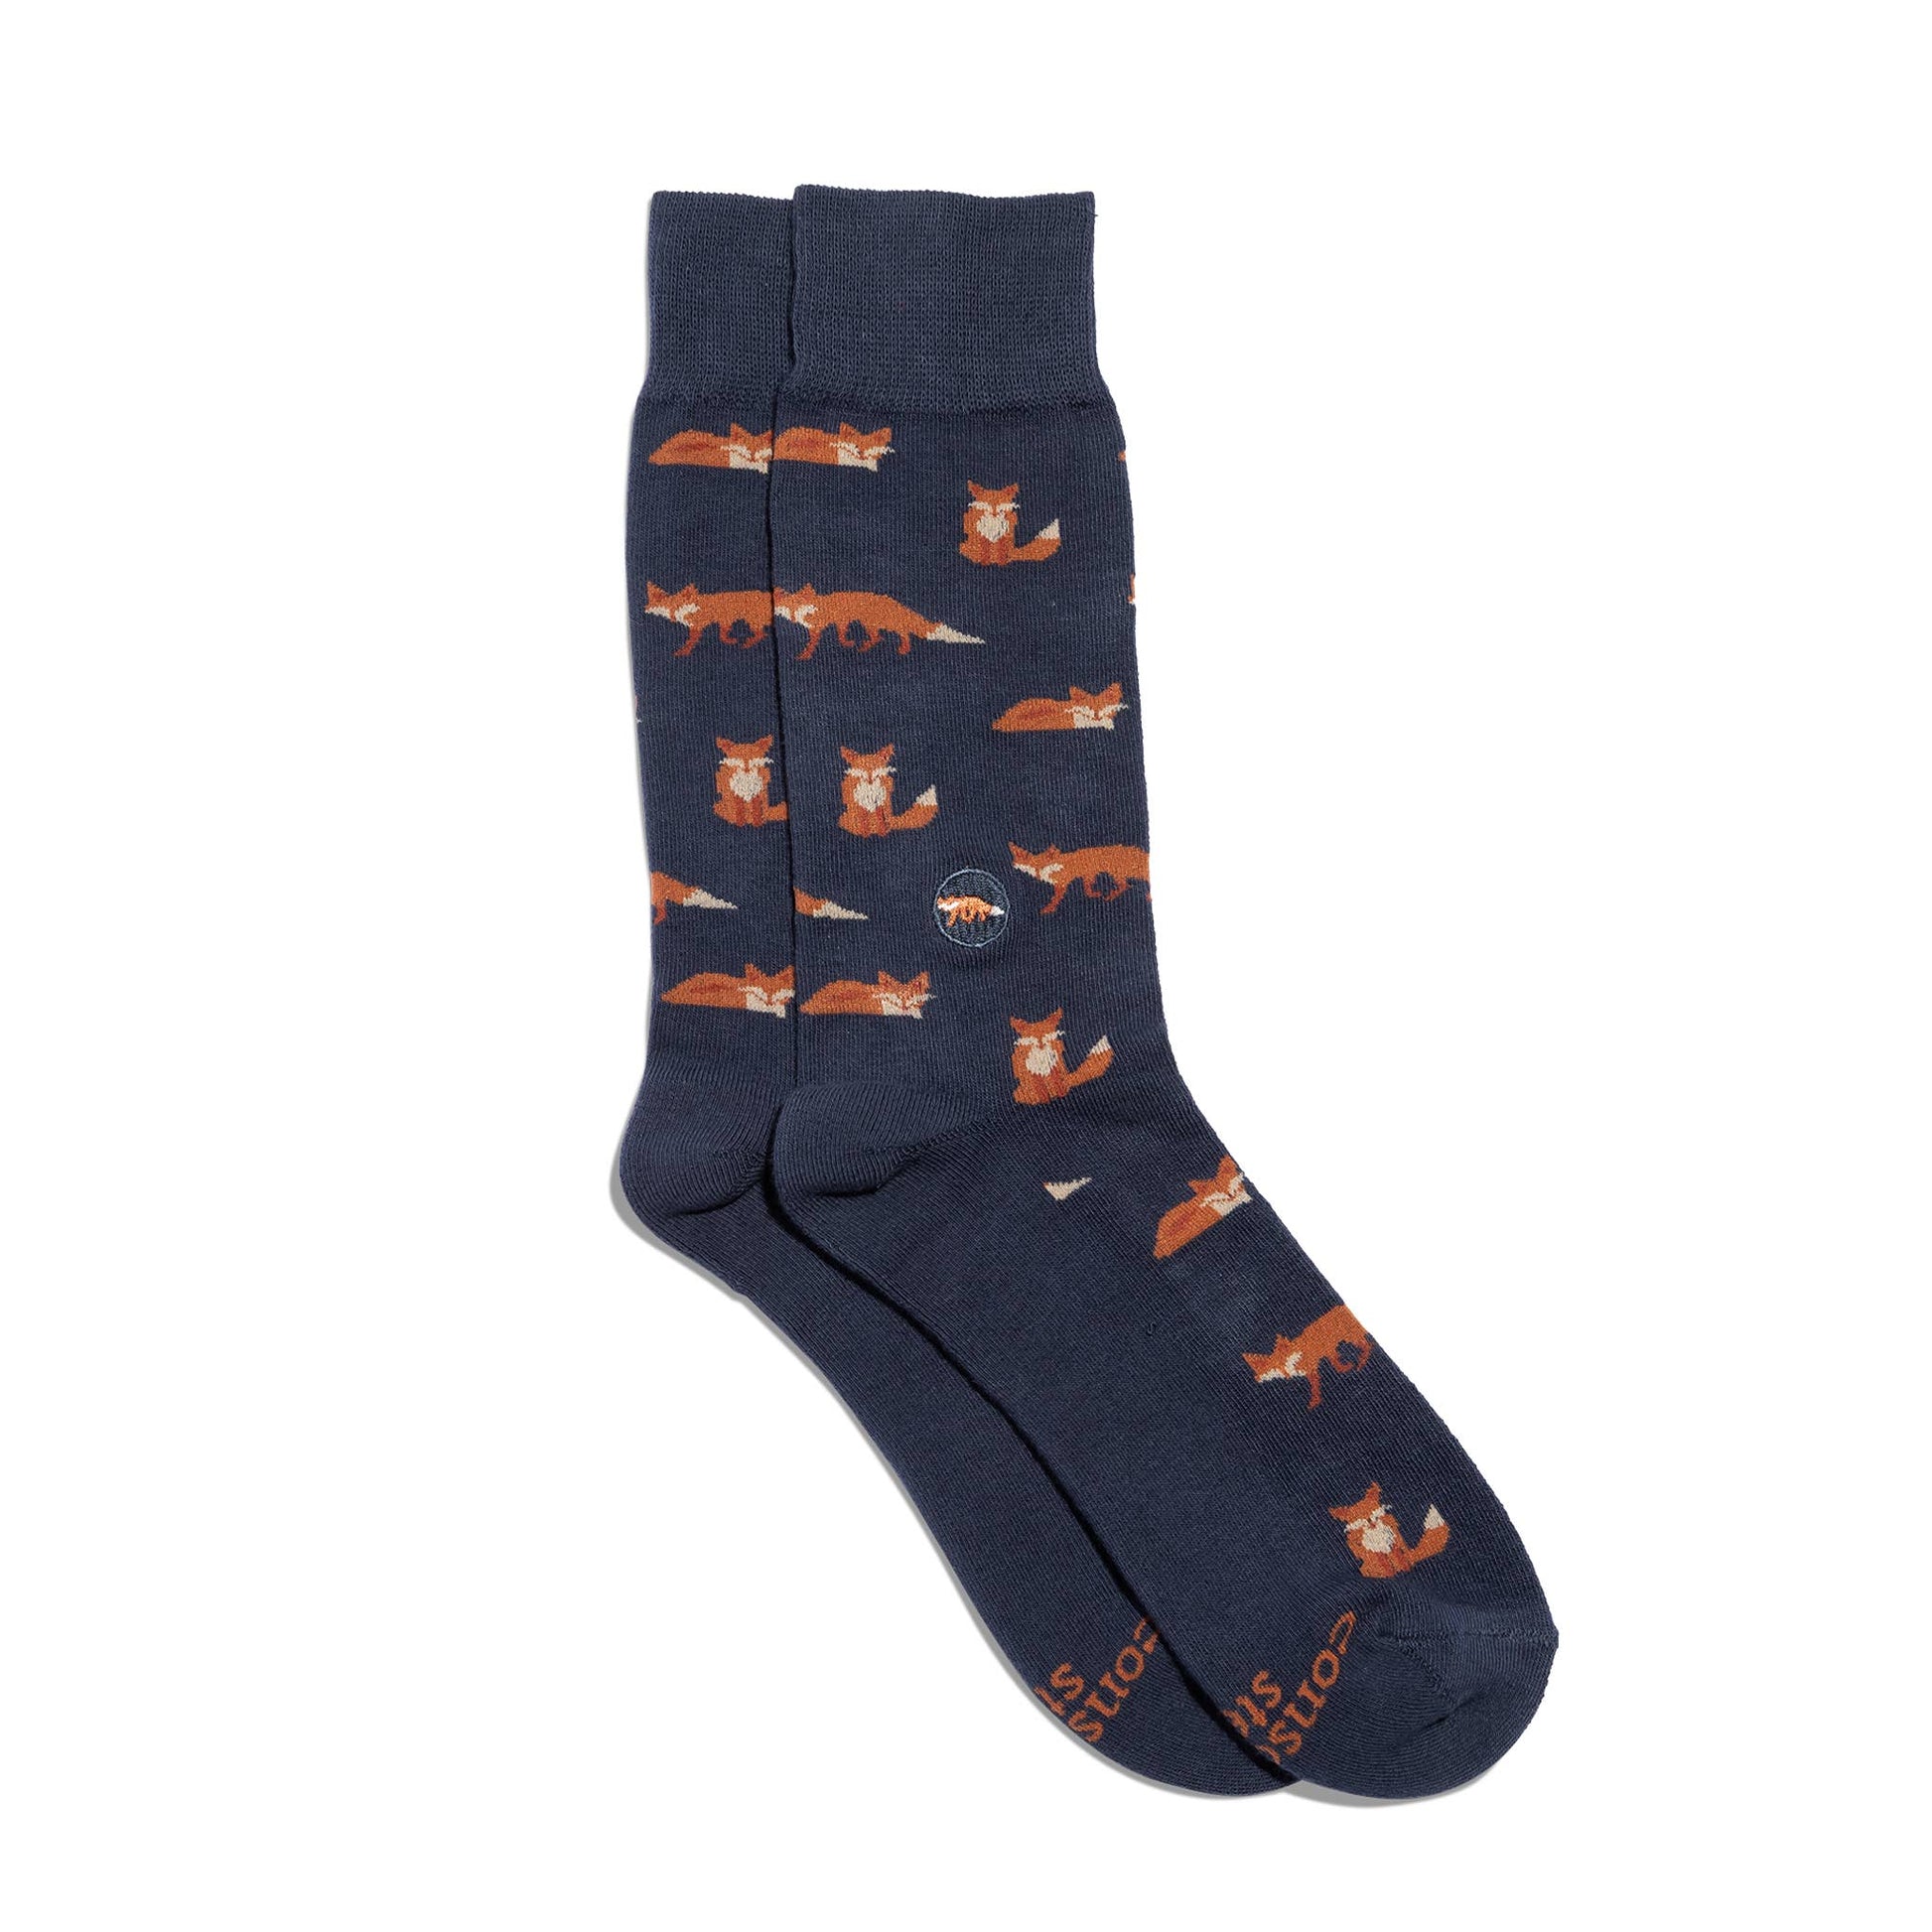 Conscious Step - Socks that Protect Foxes  Conscious Step Small  -better made easy-eco-friendly-sustainable-gifting